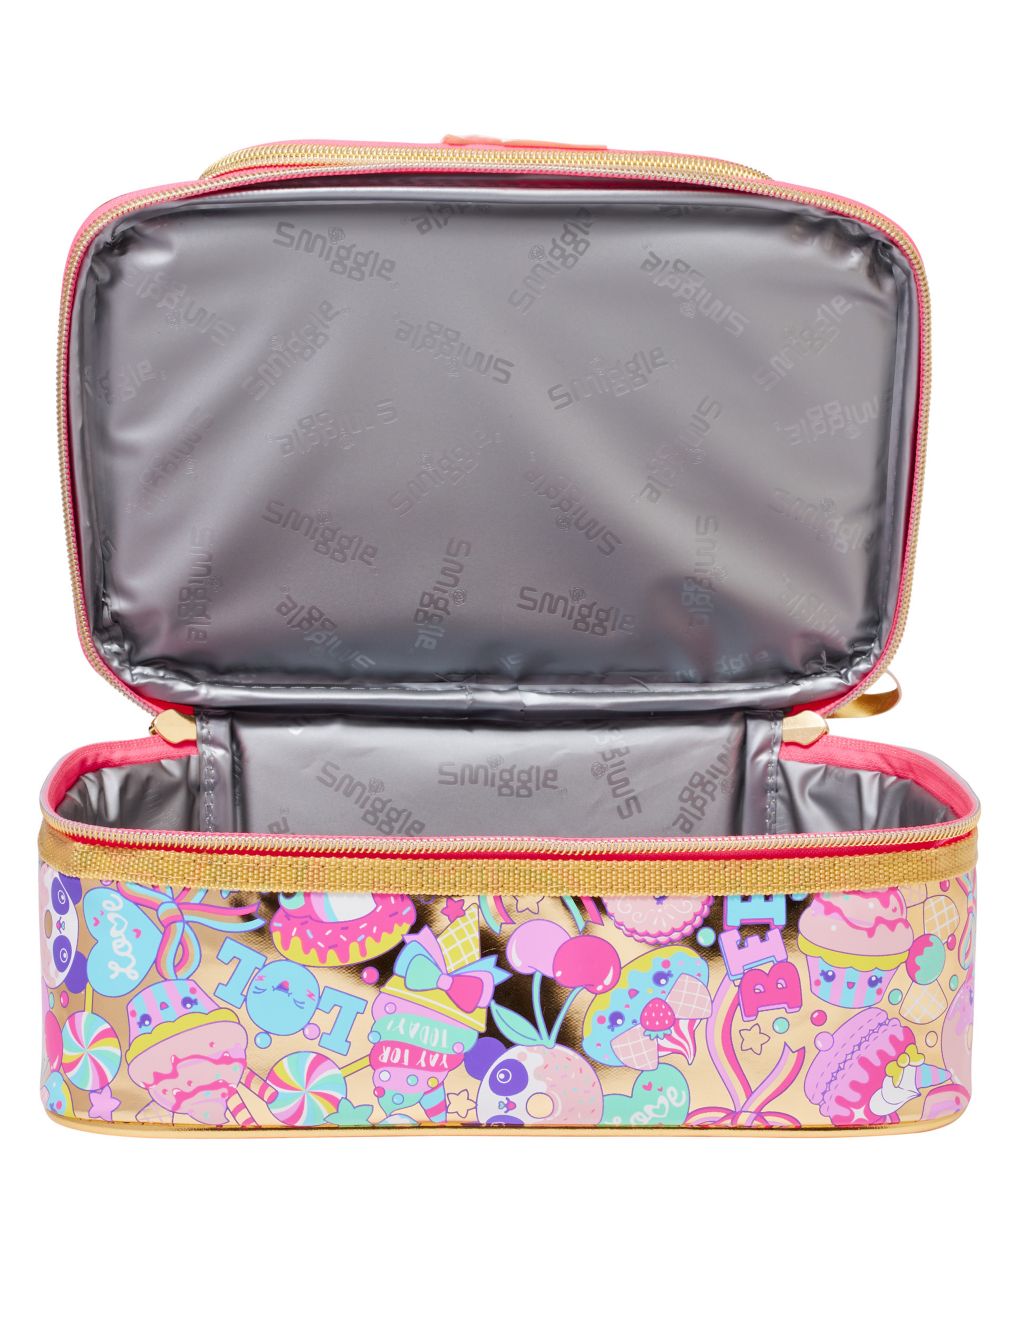 Kids' Patterned Lunch Box image 3